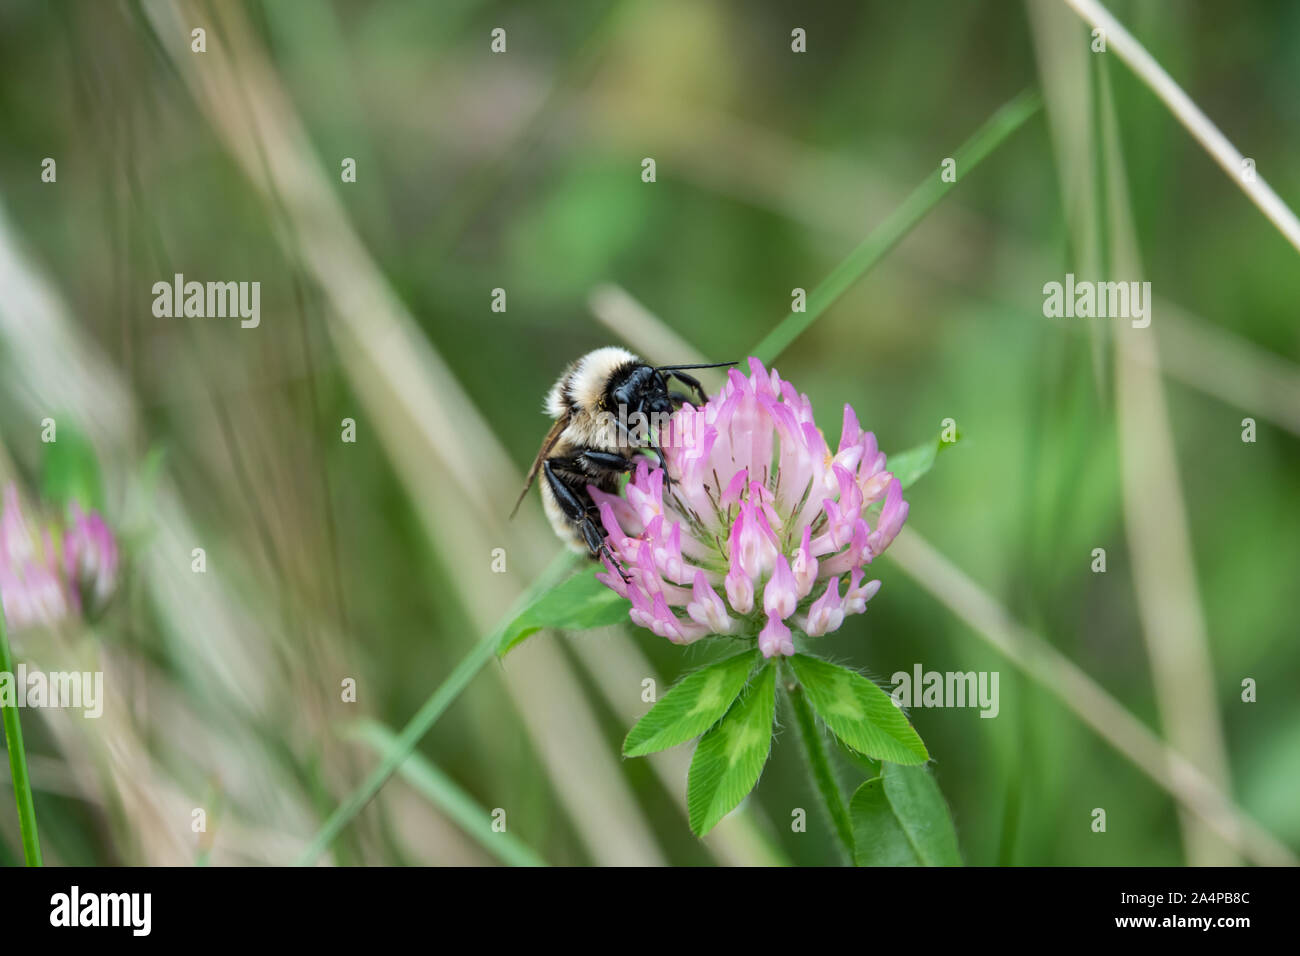 Bumblebee on Red Clover Flower Stock Photo